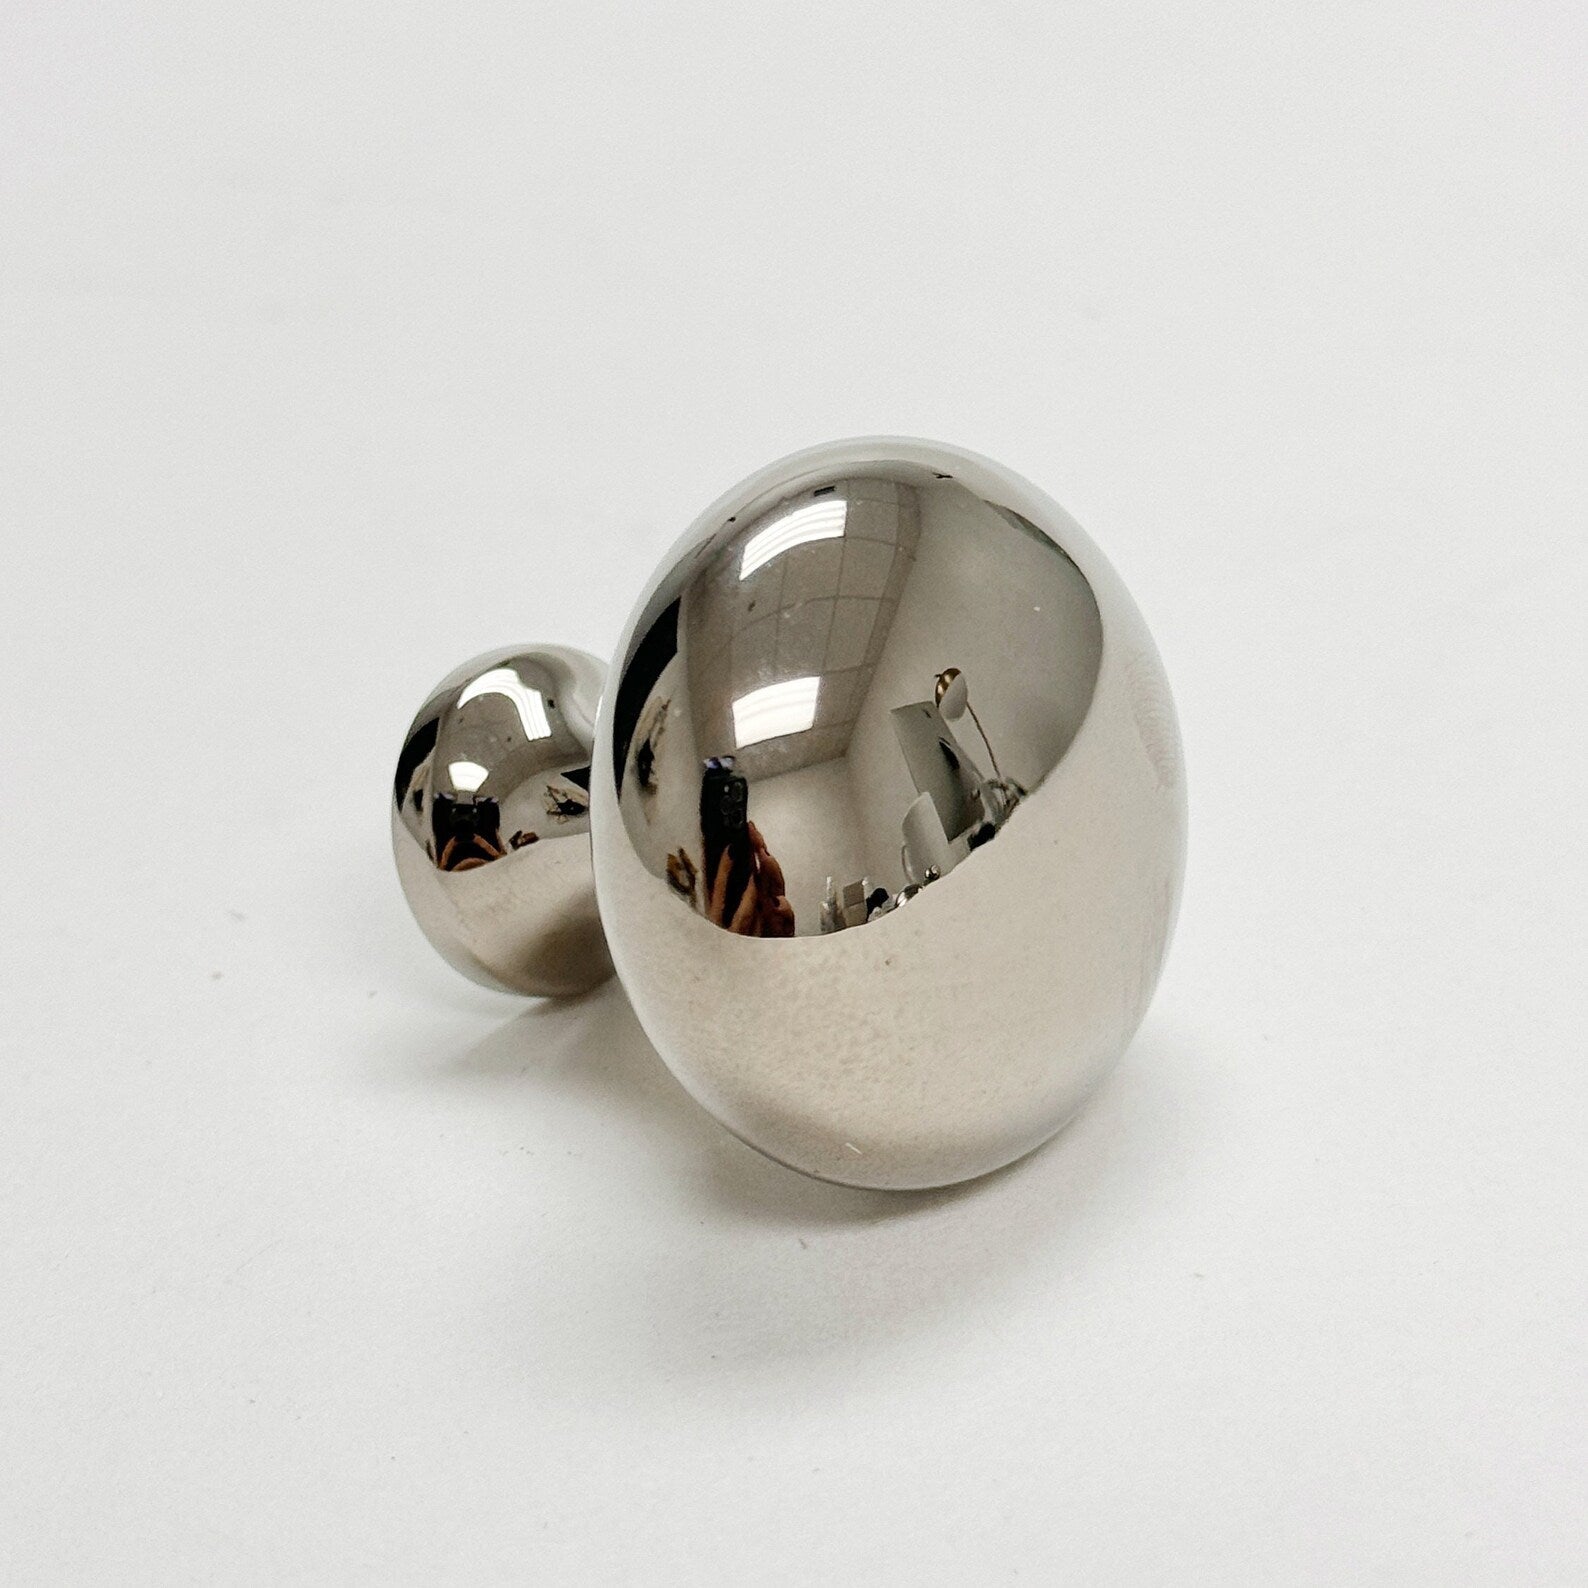 Polished Nickel "Heritage" Cabinet Knobs and Cup Pulls